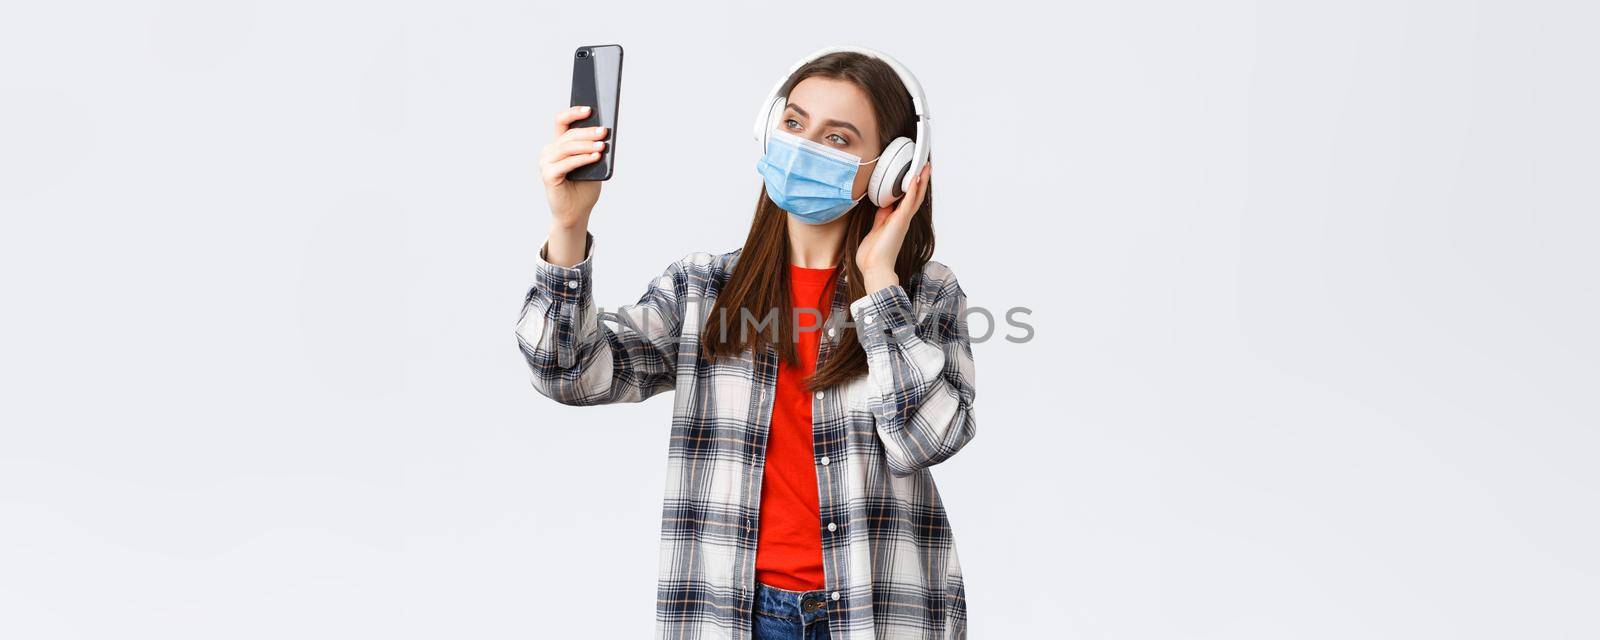 Social distancing, leisure and lifestyle on covid-19 outbreak, coronavirus concept. Woman in headphones and medical mask listening music, taking selfie on mobile phone using filters by Benzoix